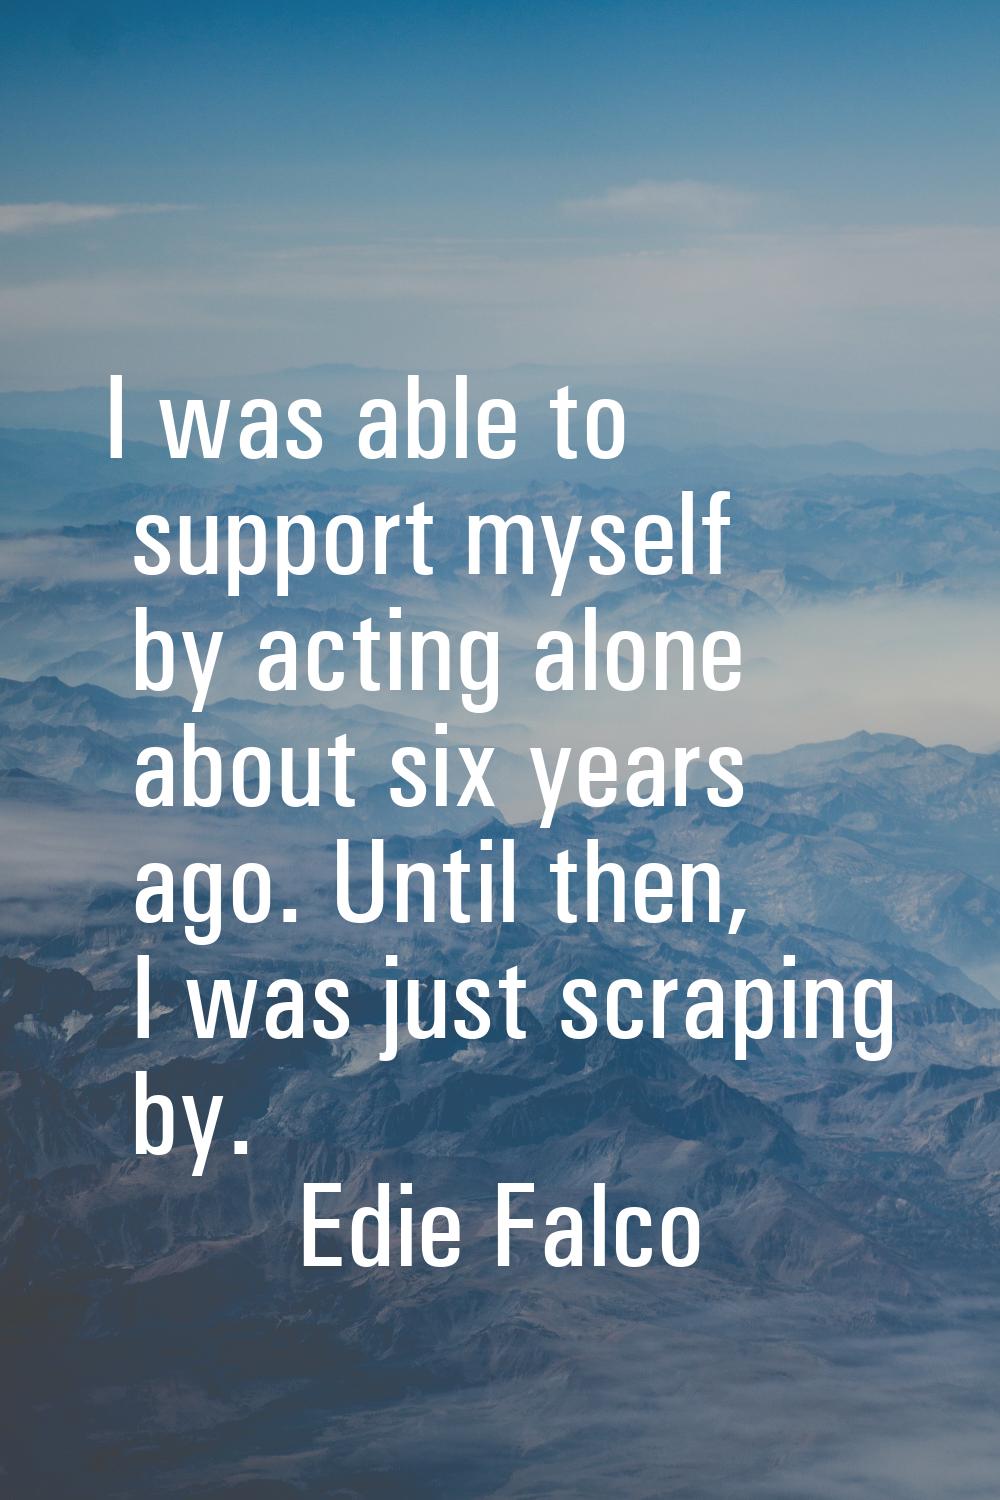 I was able to support myself by acting alone about six years ago. Until then, I was just scraping b